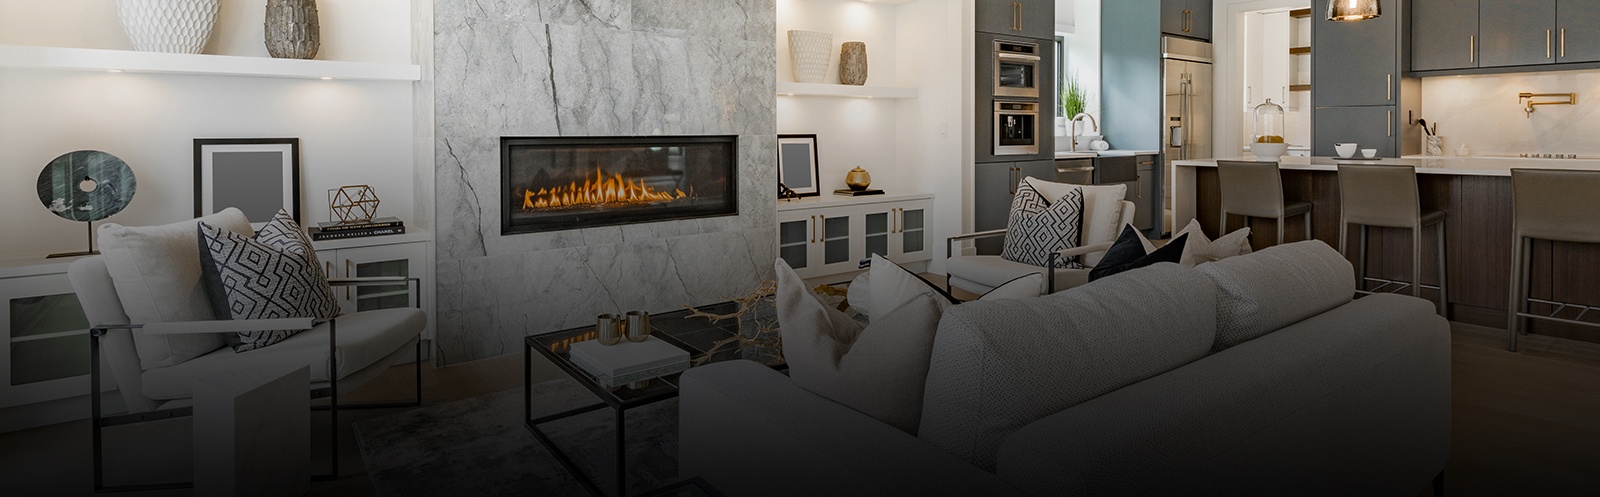 Gas Fireplace Sales, Installation & Maintenance Services